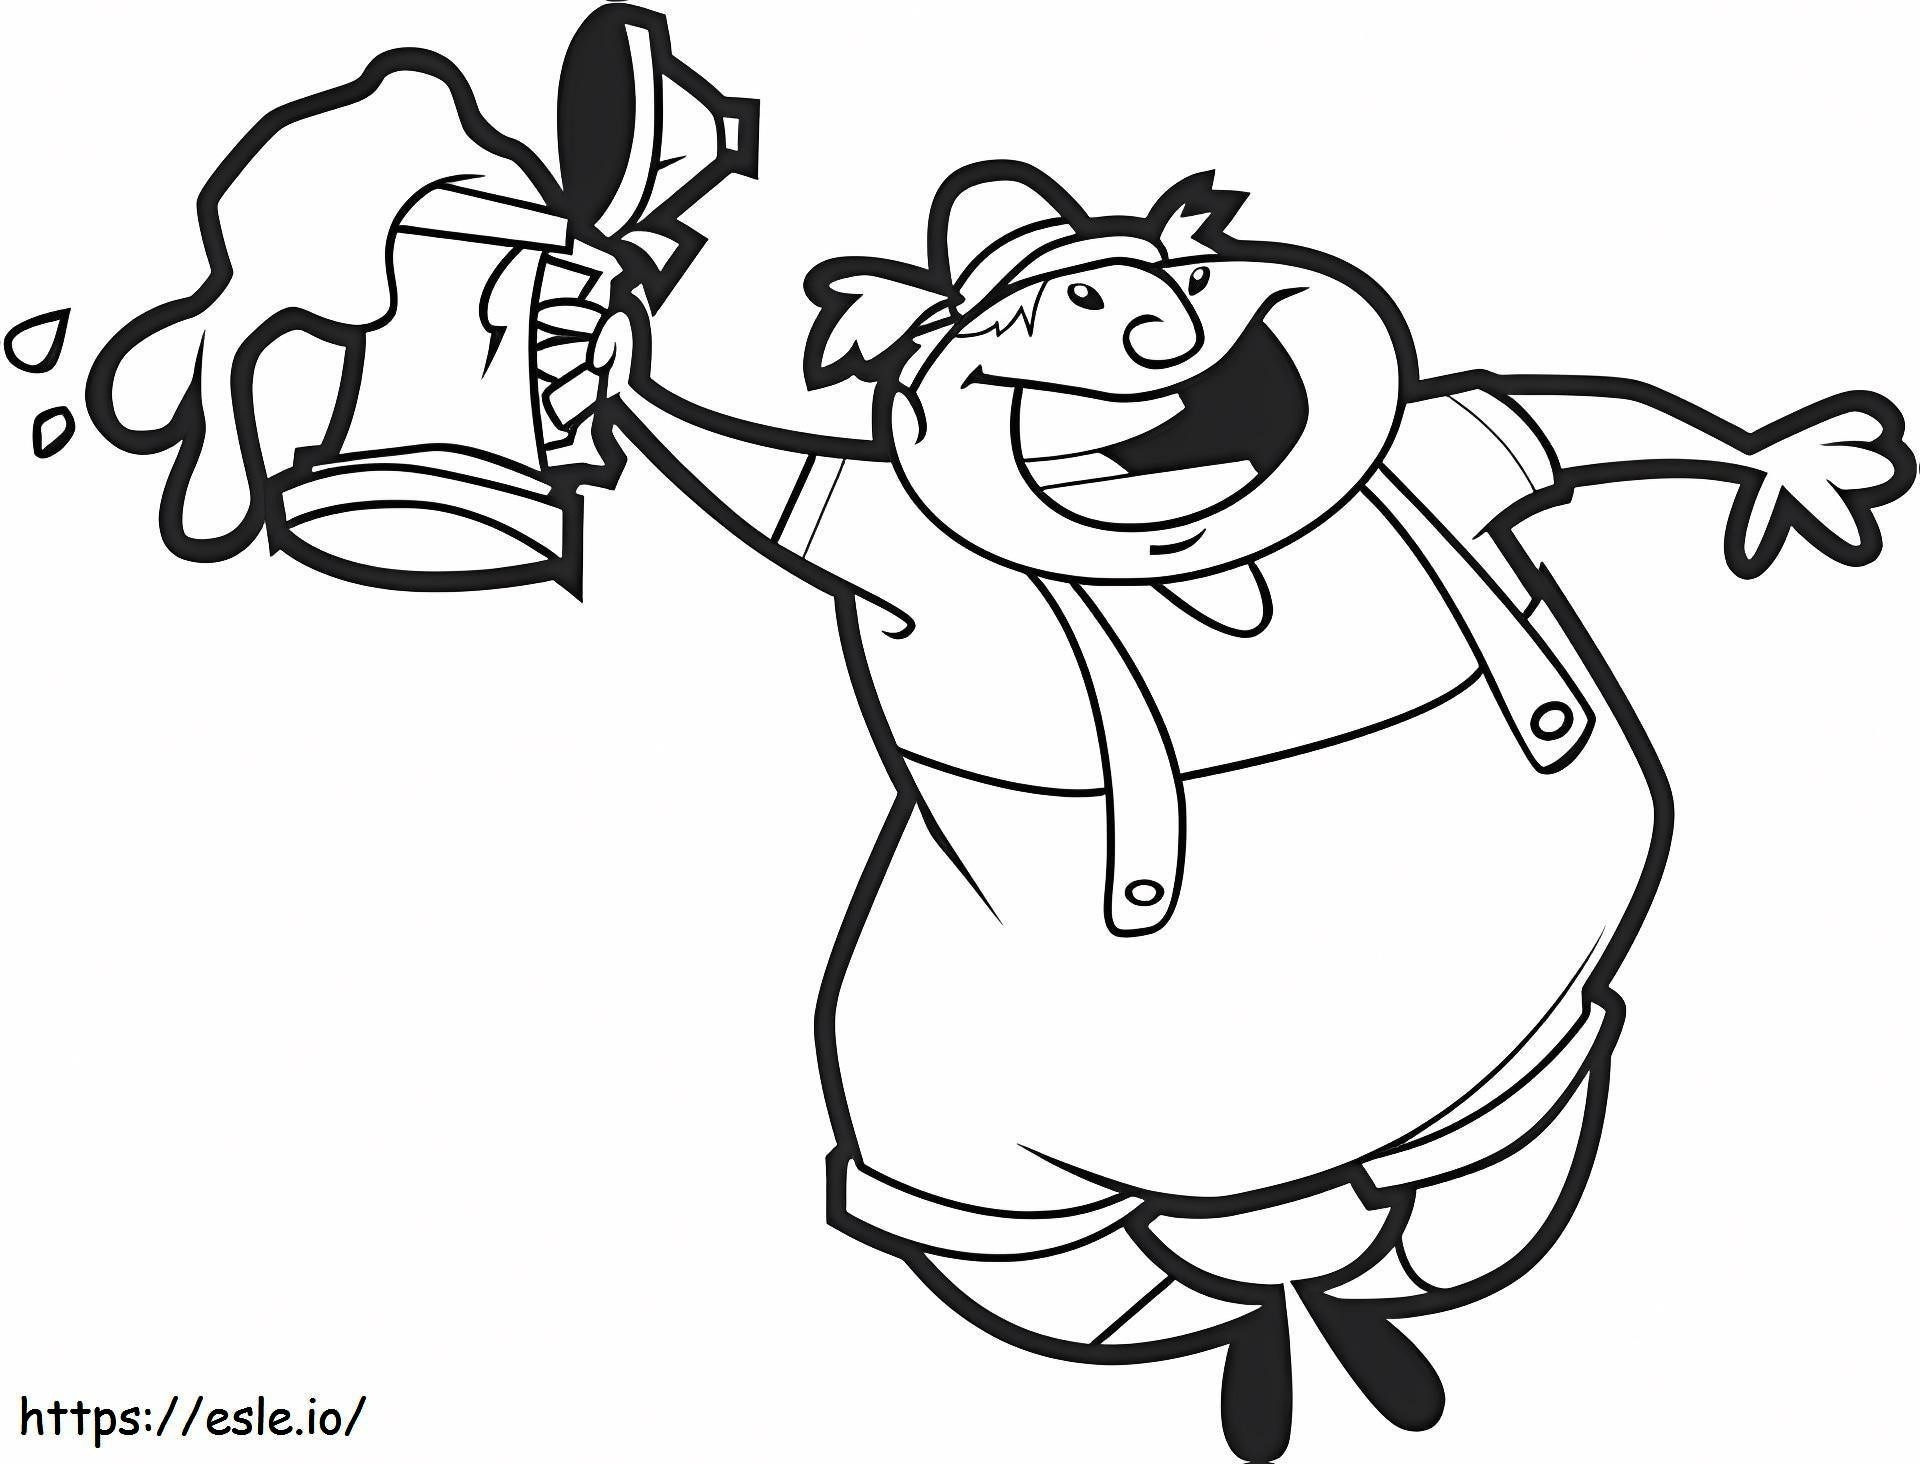 1534555422 Man In Oktoberfest A4 coloring page